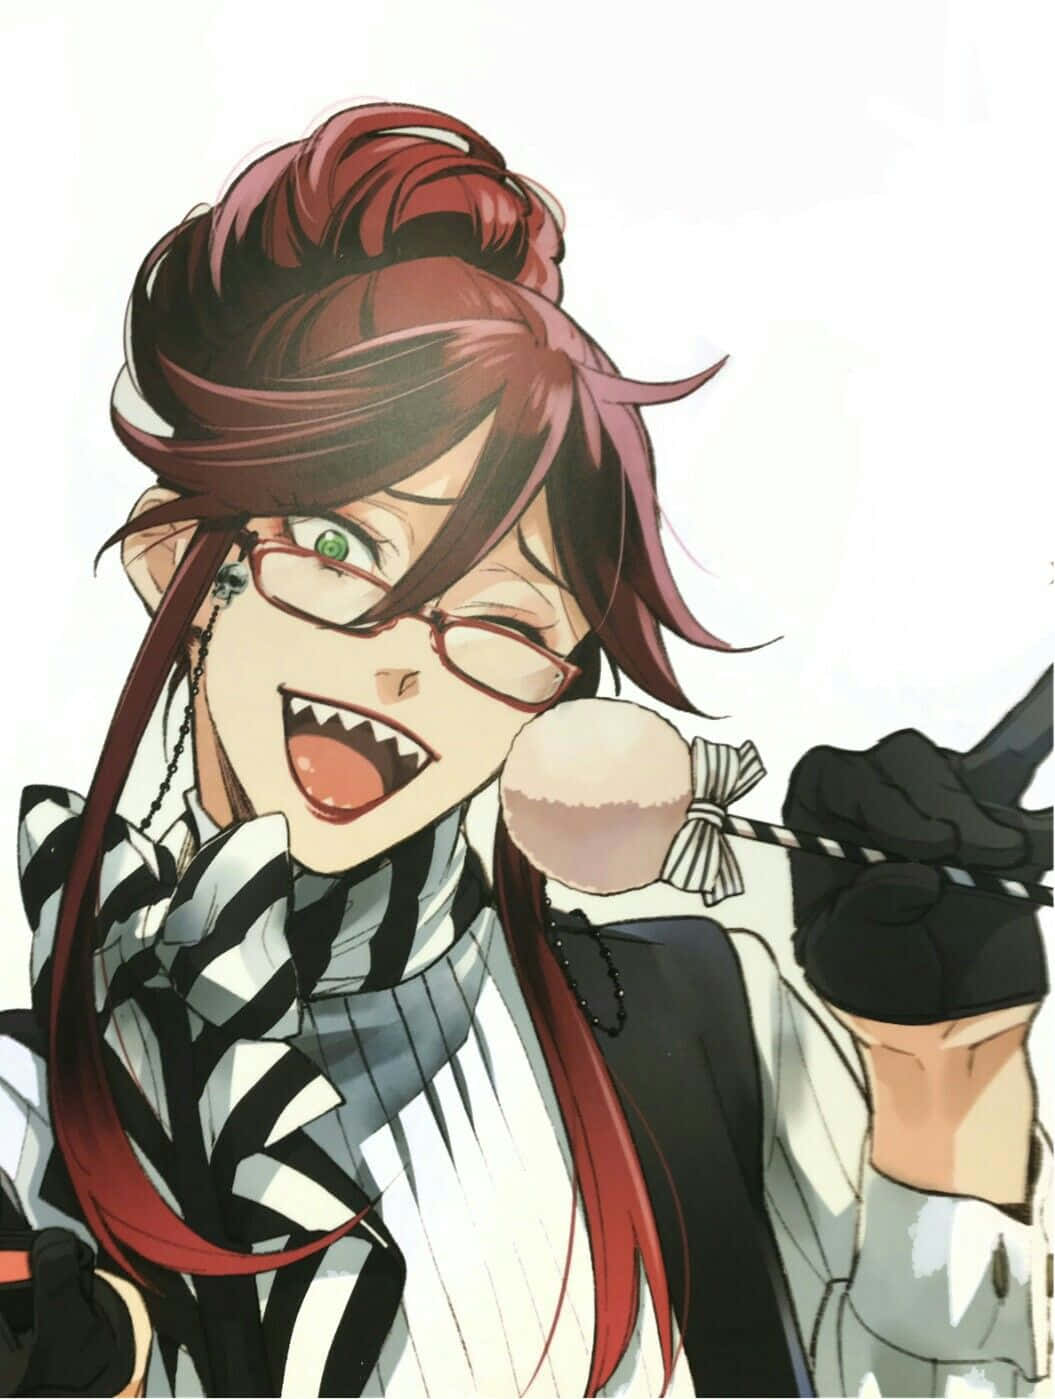 Grell Sutcliff striking a colorful and fierce pose in a captivating illustration. Wallpaper